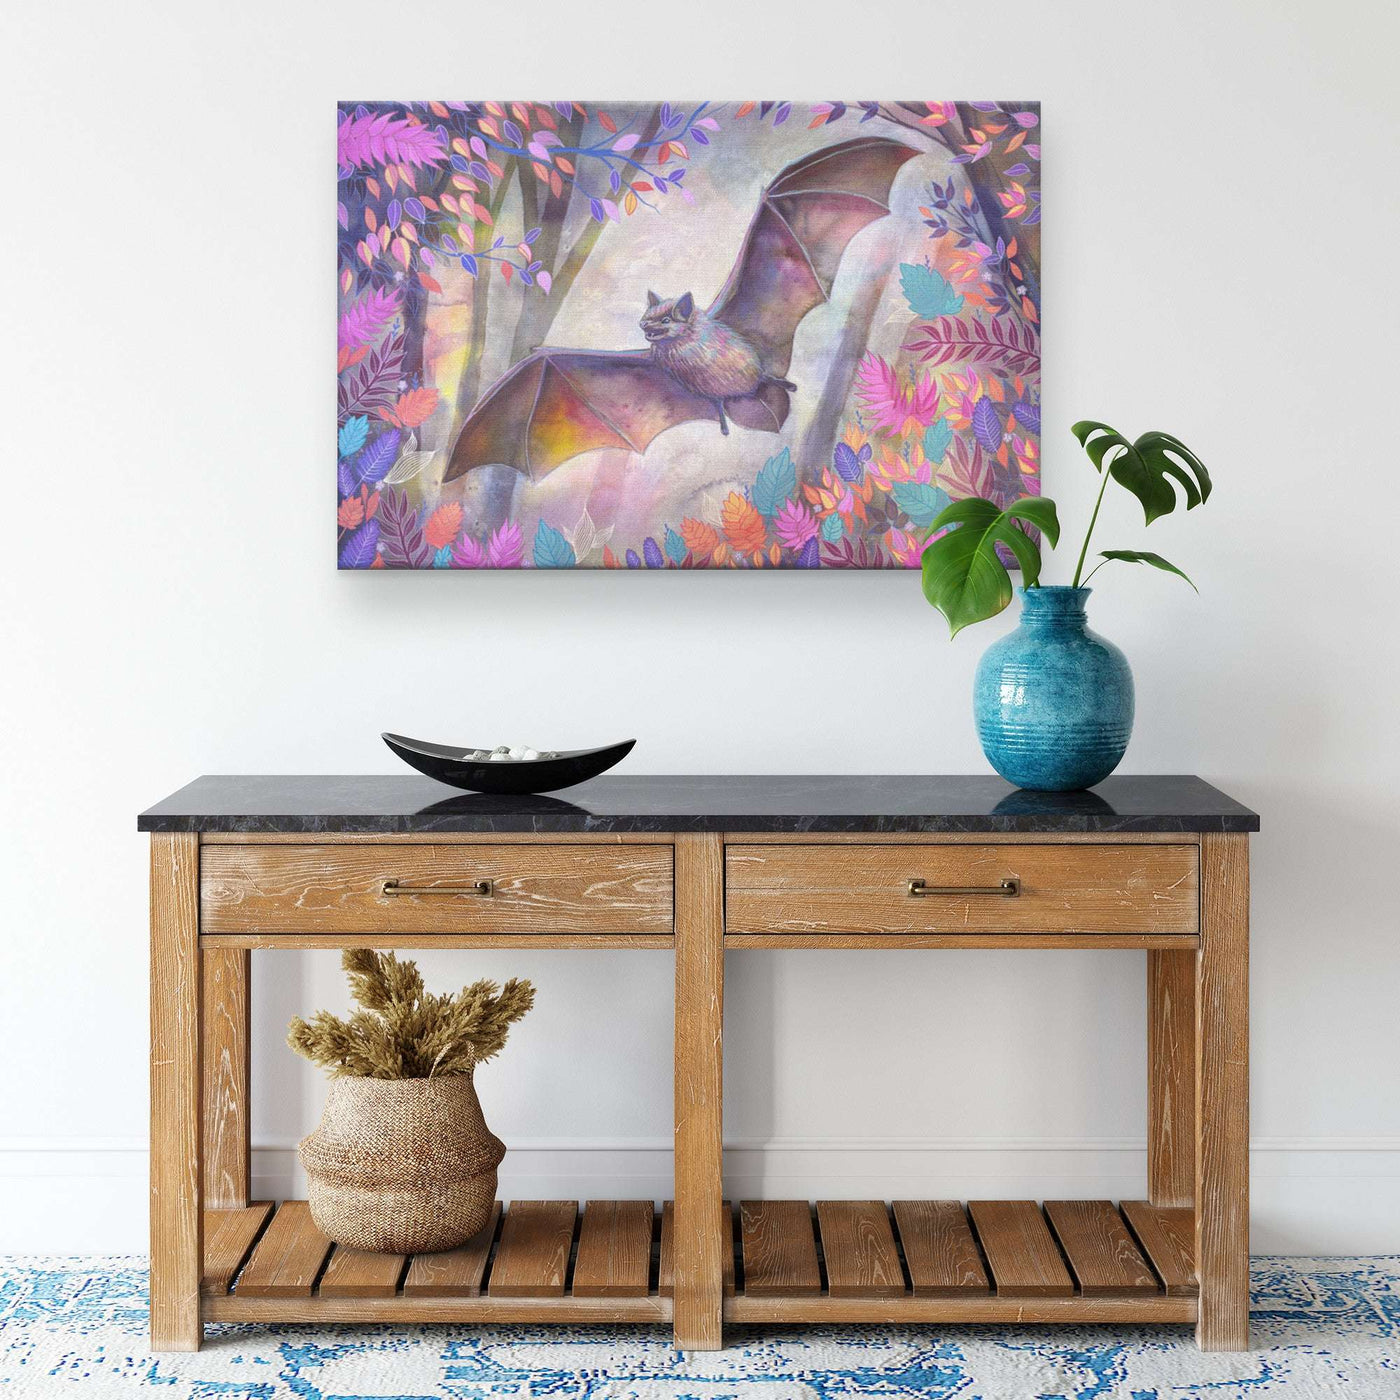 A decorated wooden console table against a white wall with a Canvas Bat Print above it